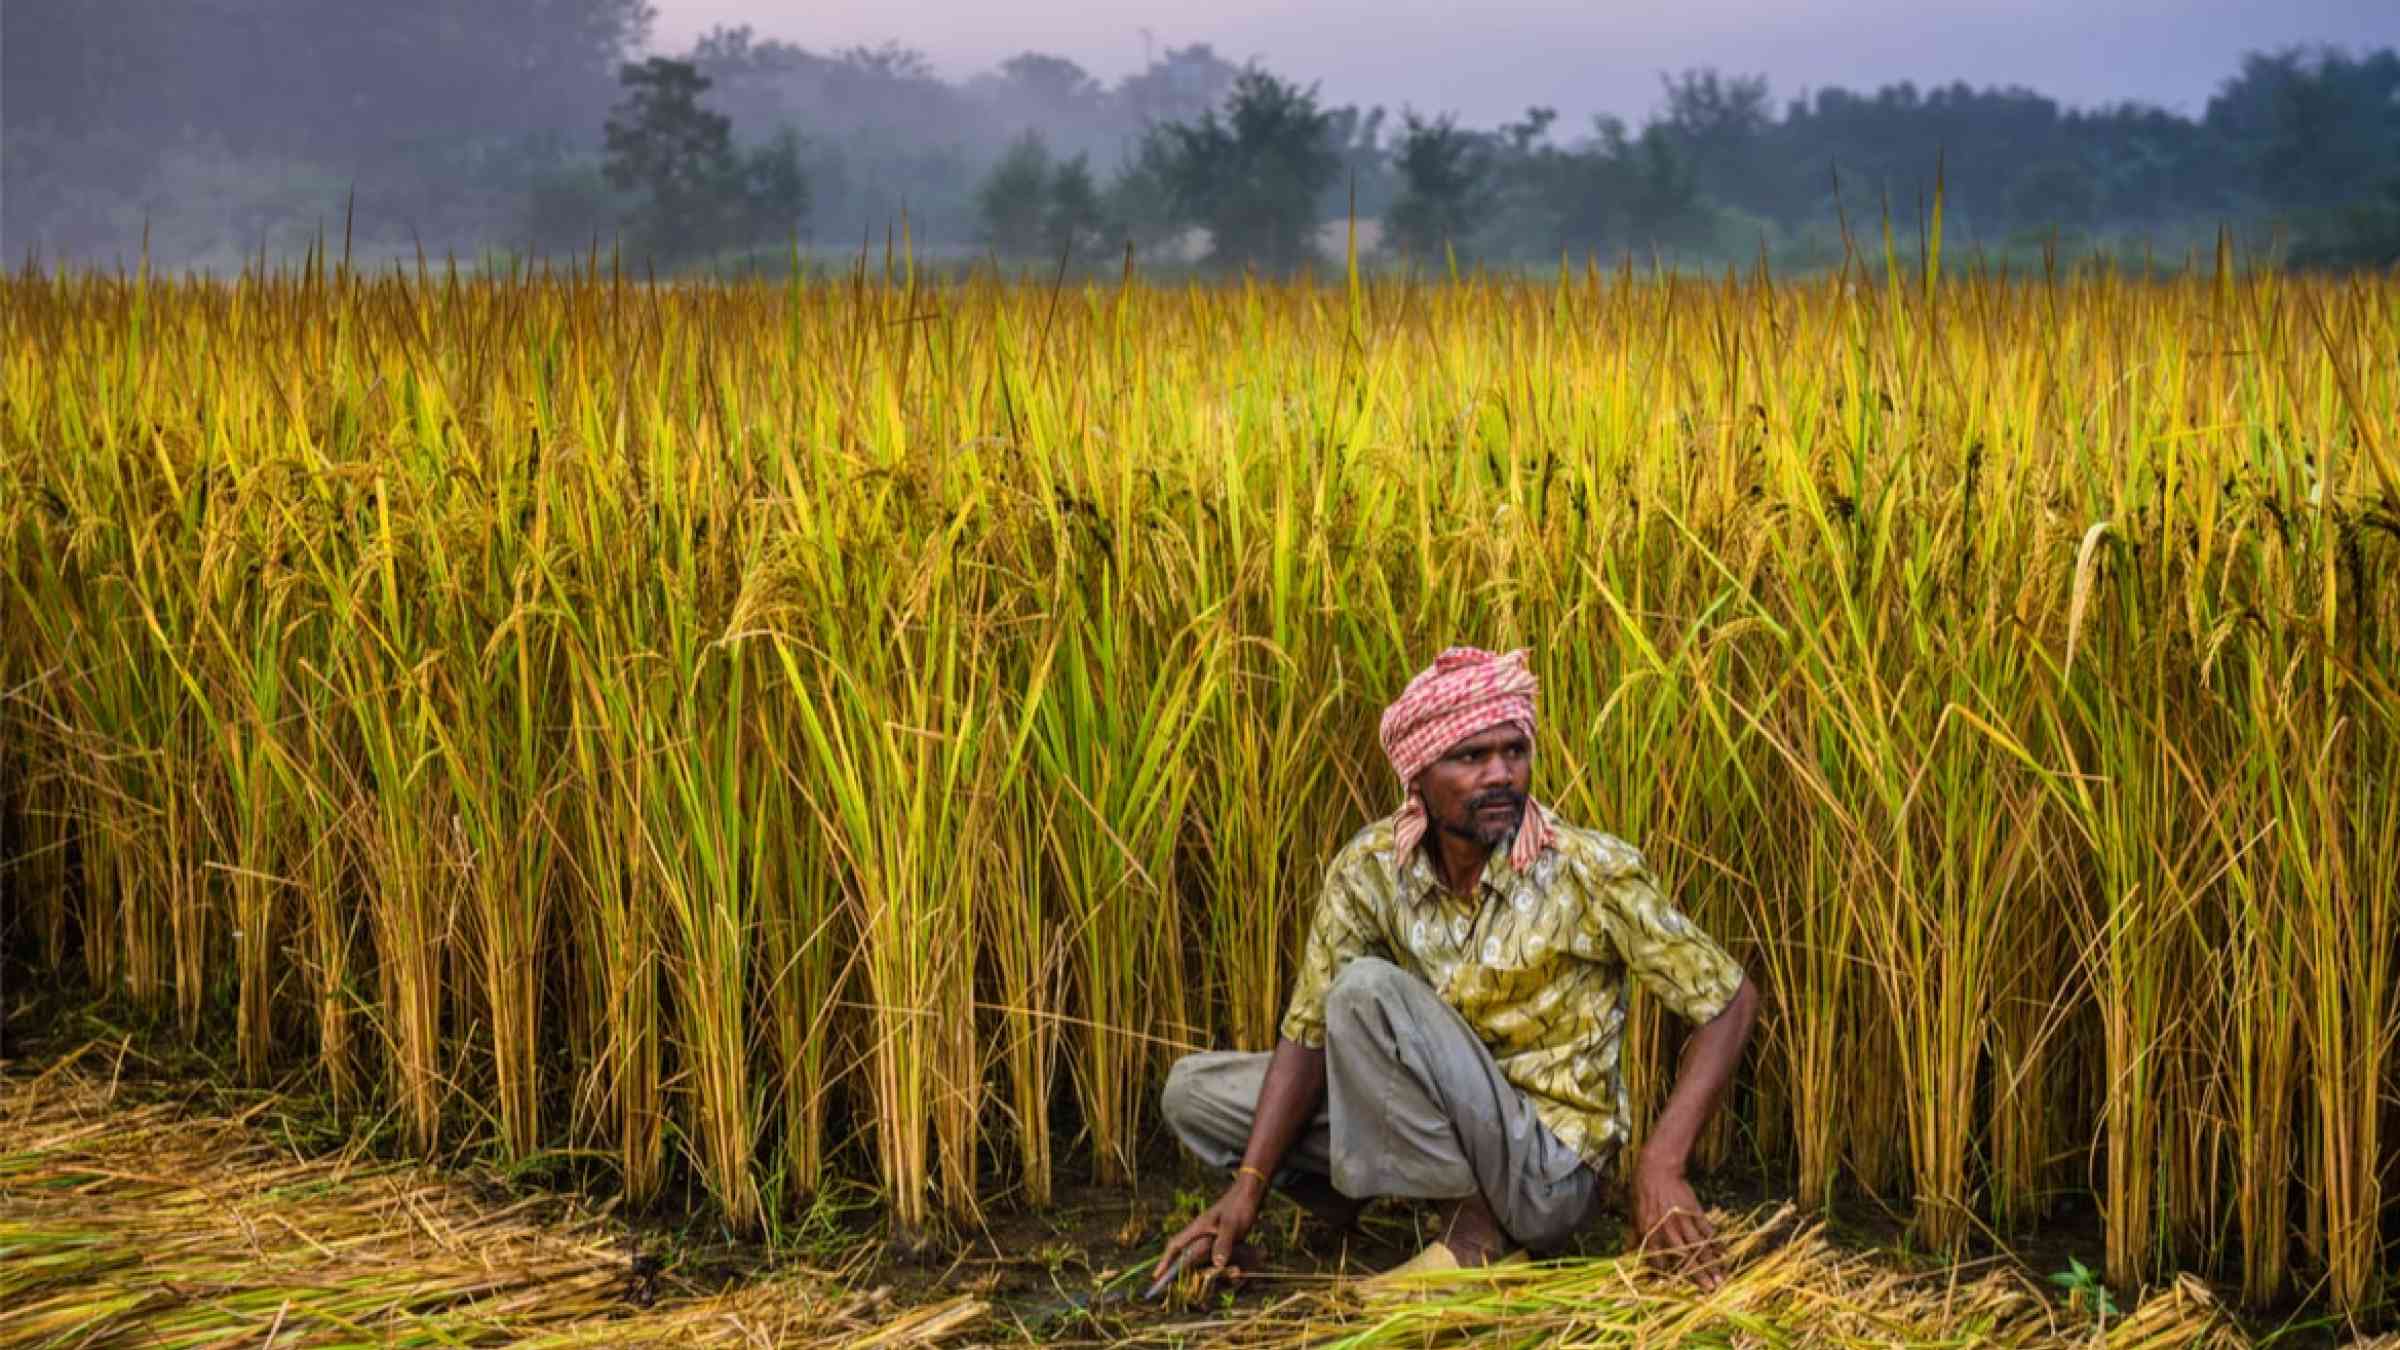 Nepalese man working in a rice field